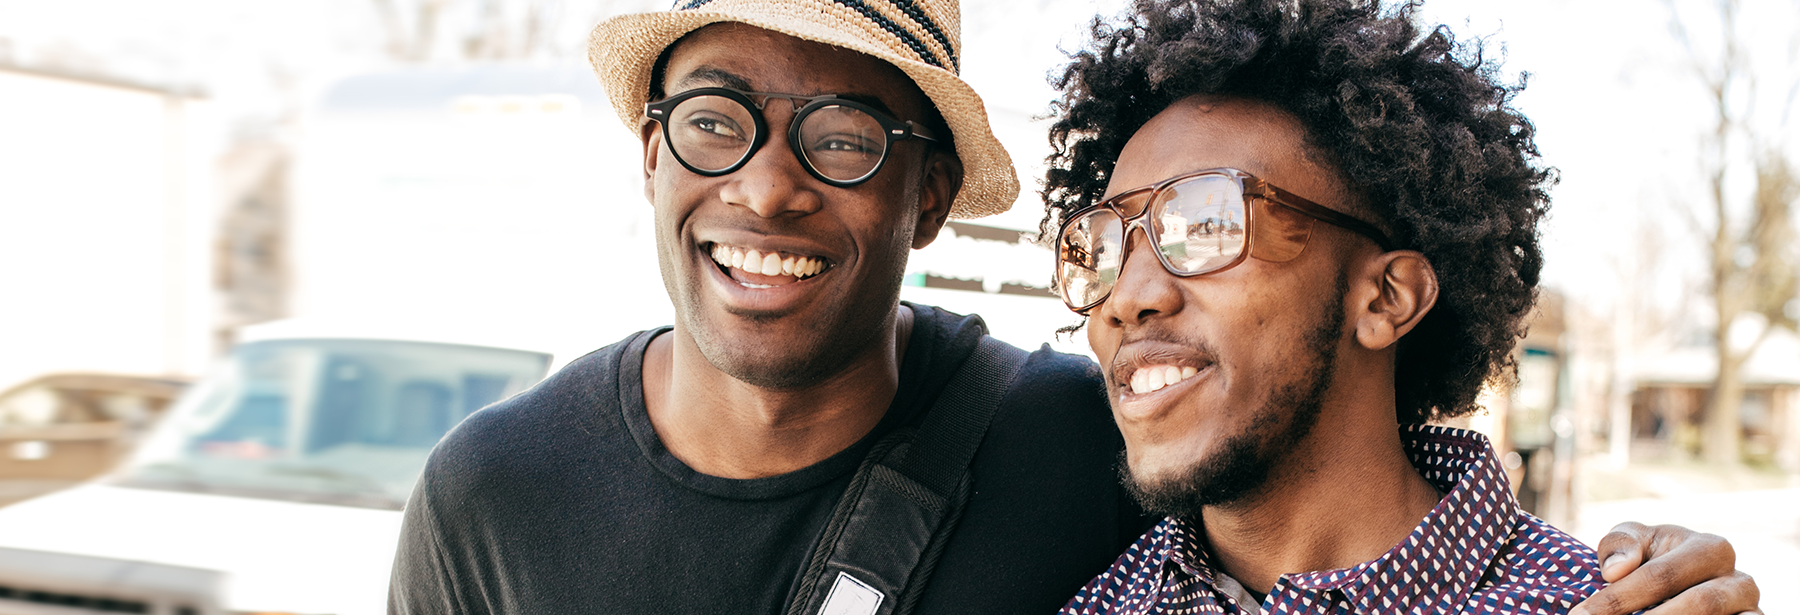 black male gay couple walking down the street smiling